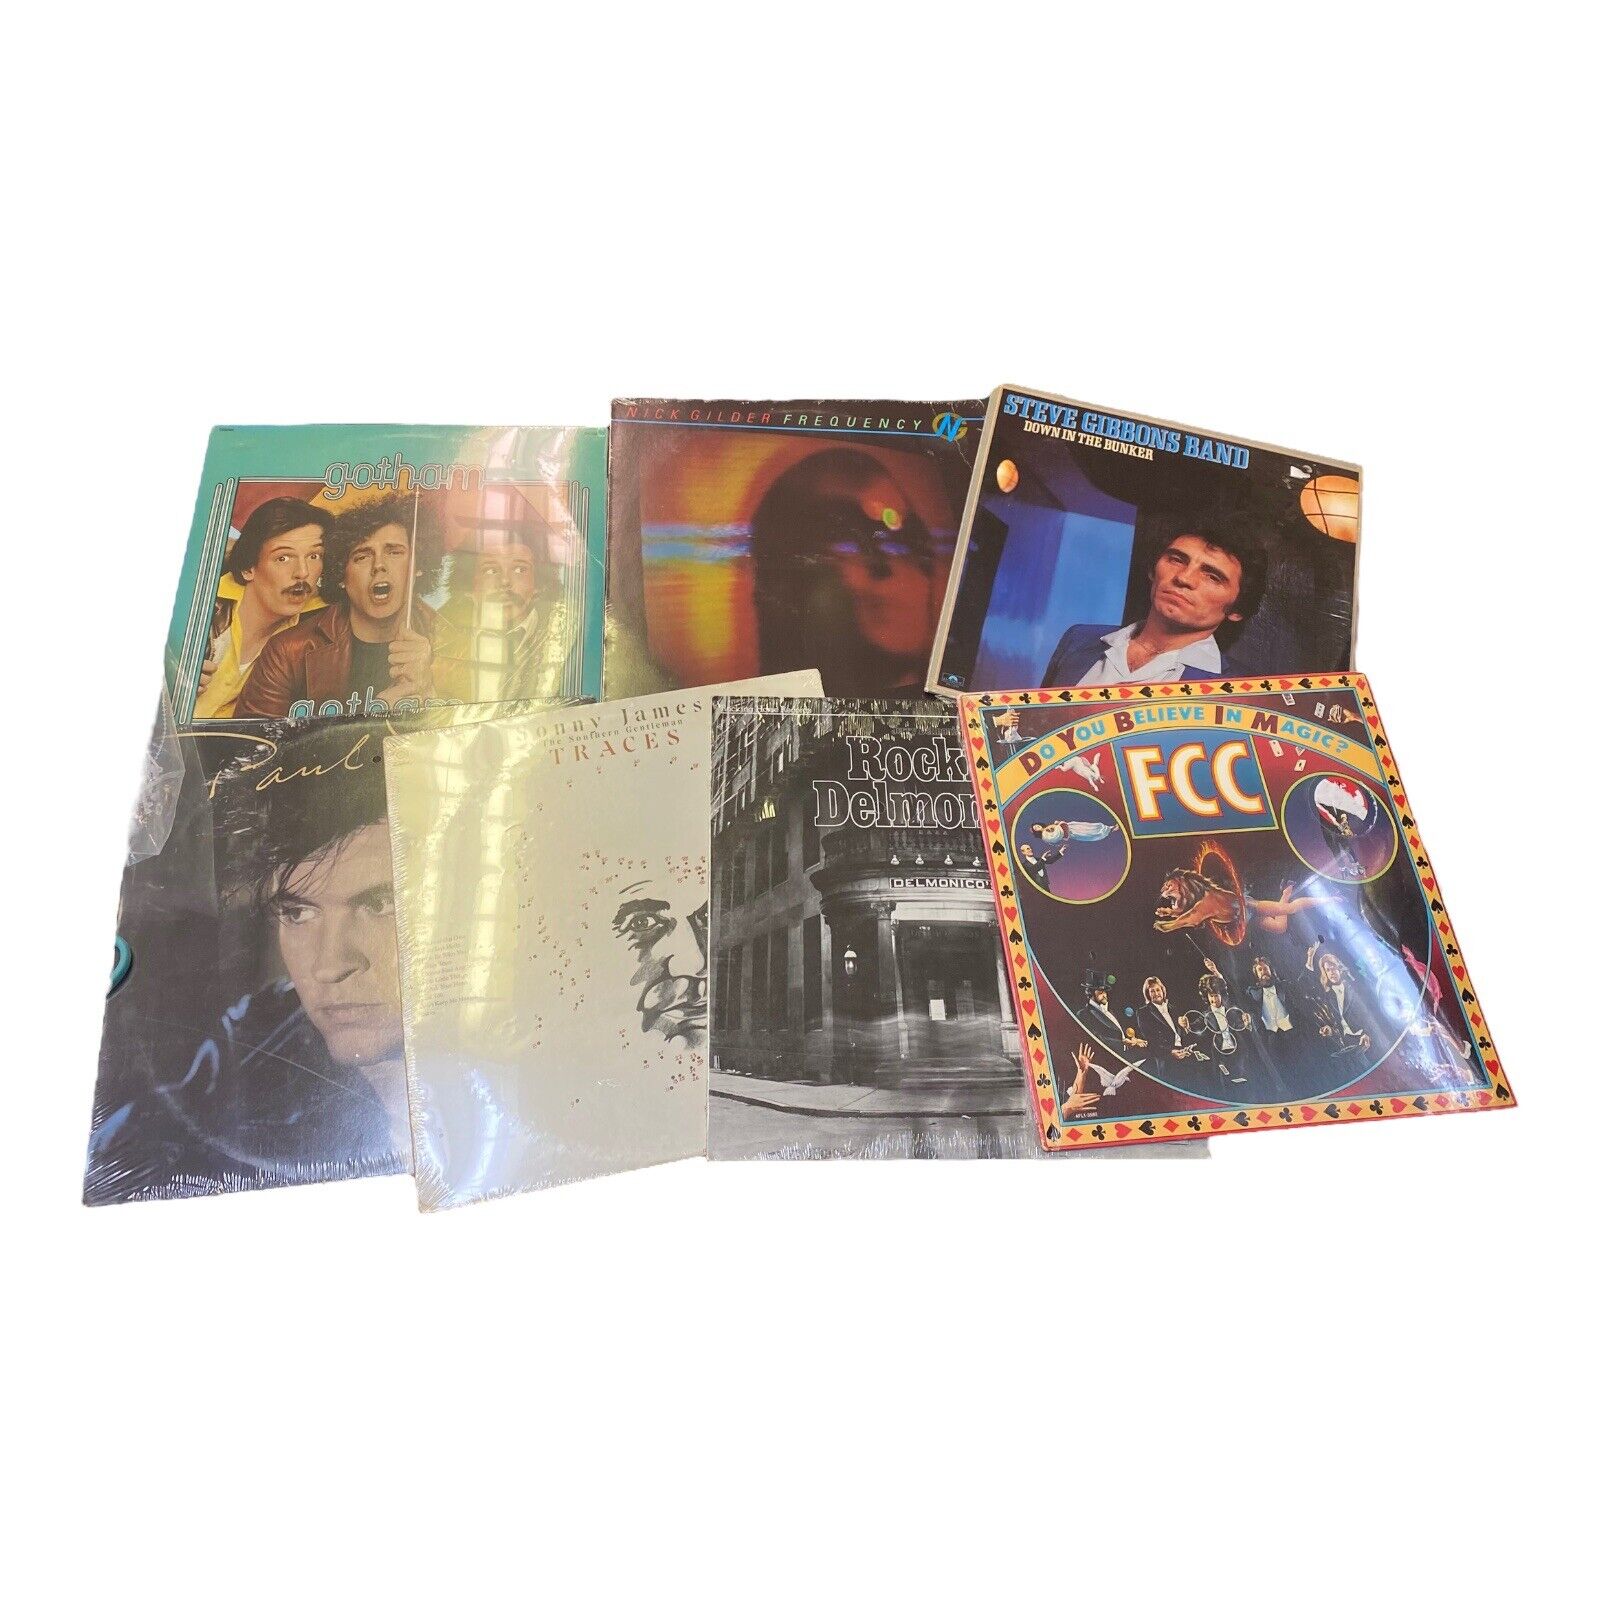 $6 New Old Stock Sealed Vinyl Records LP 70's 80's 90's $6 Flat Shipping